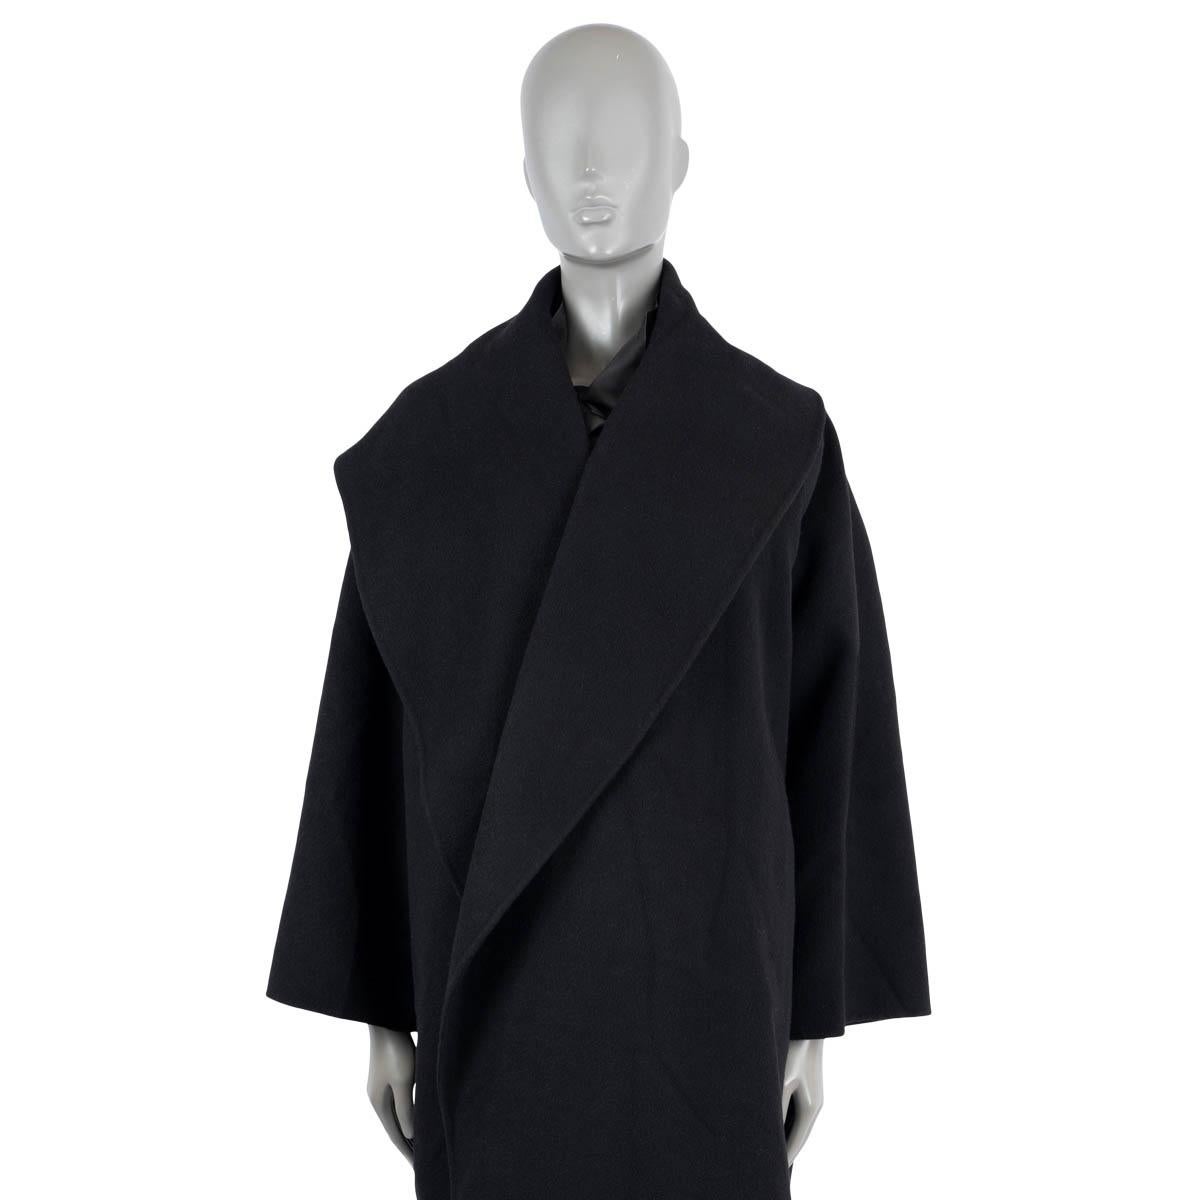 100% authentic Bottega Veneta belted wrap coat in black soft cashmere (100%). Features a maxi shawl collar and two seam pockets. Oversized fit. Has been worn and is in excellent condition. However the matching belt is